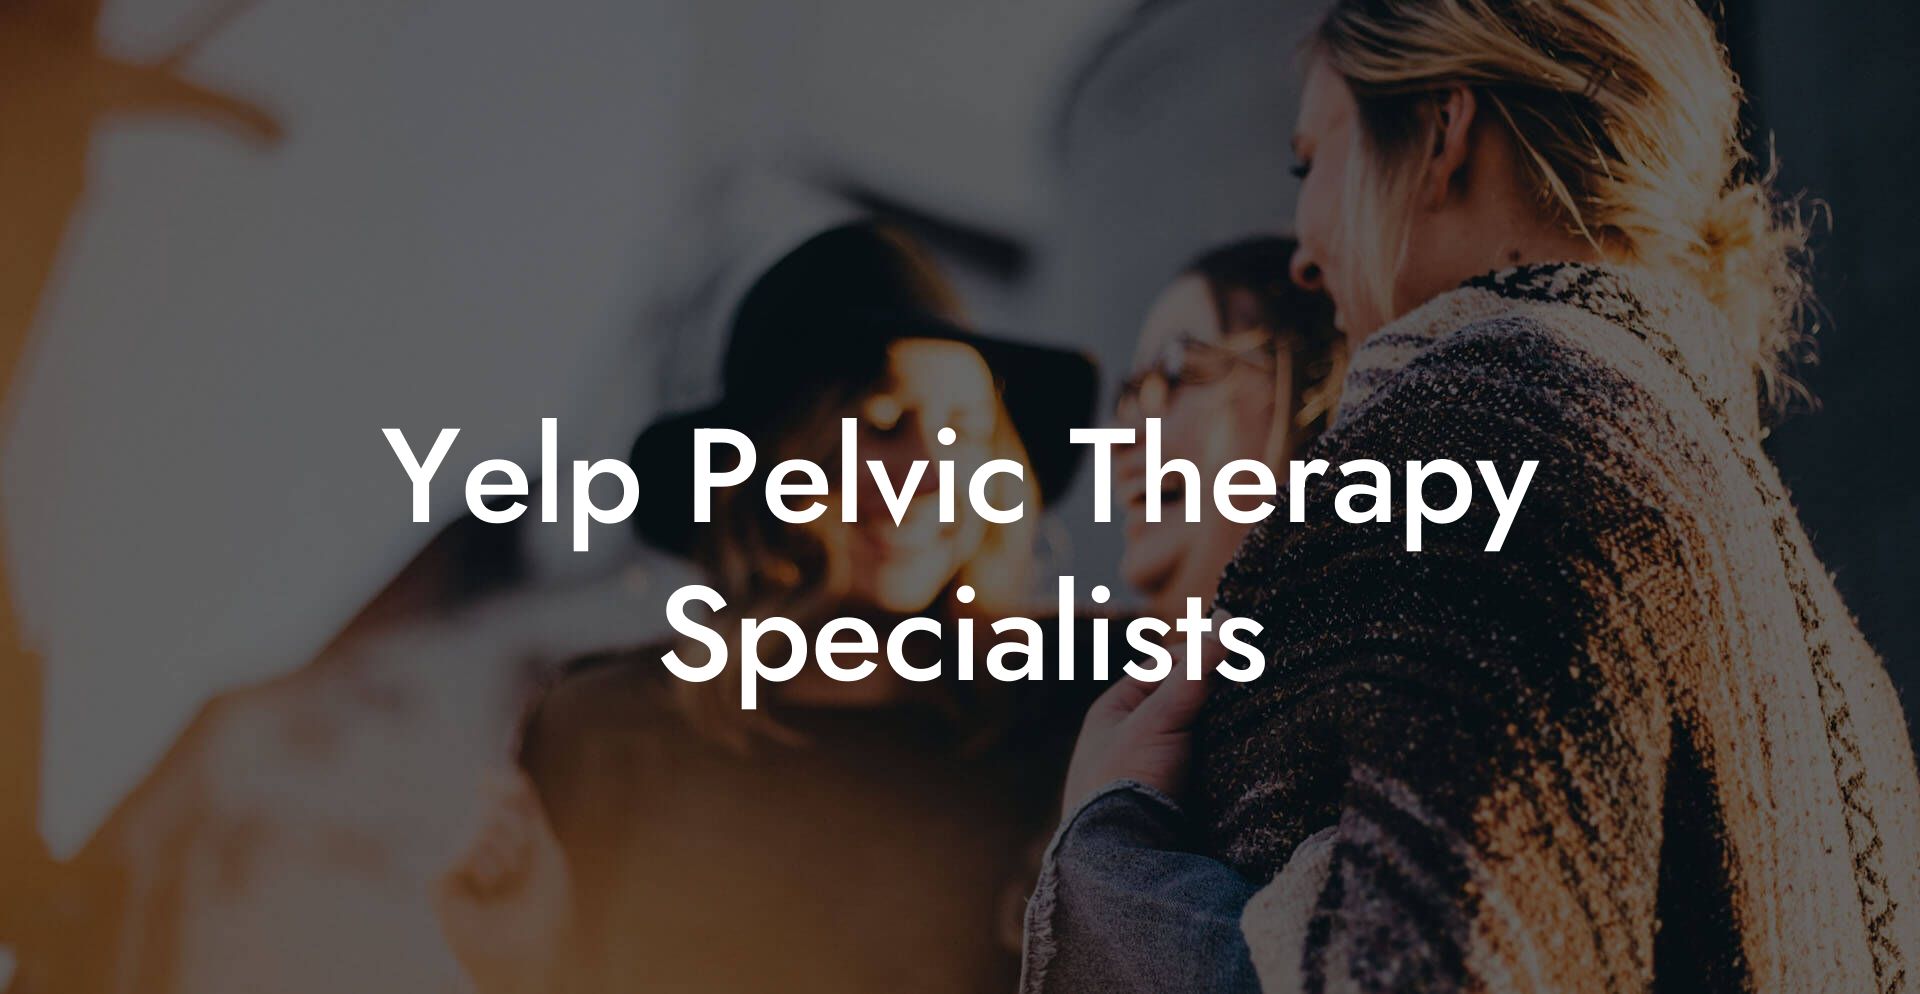 Yelp Pelvic Therapy Specialists